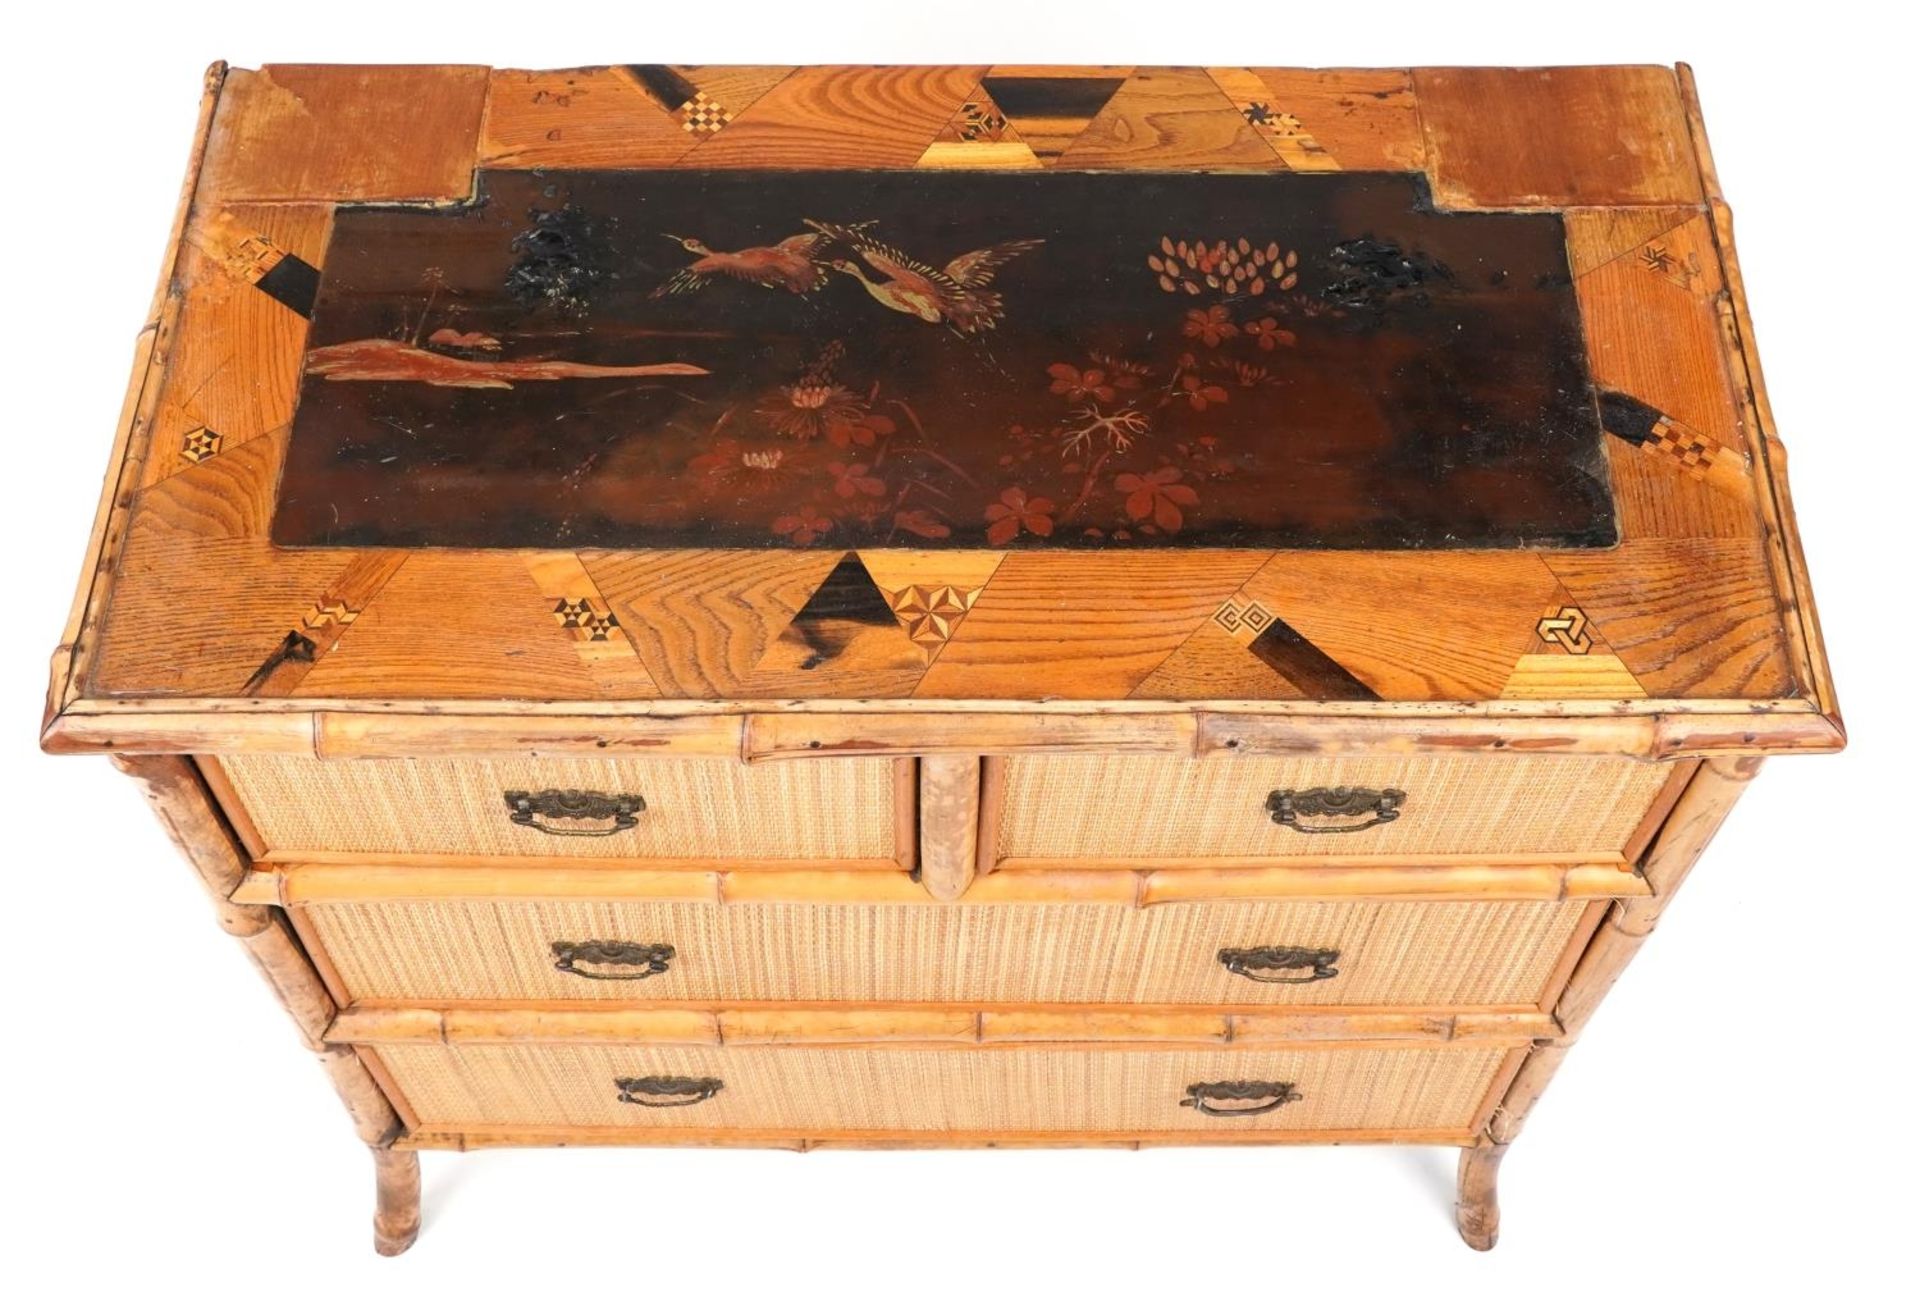 Victorian aesthetic bamboo four drawer chest with Japanned inlaid and lacquered top hand painted - Image 3 of 4